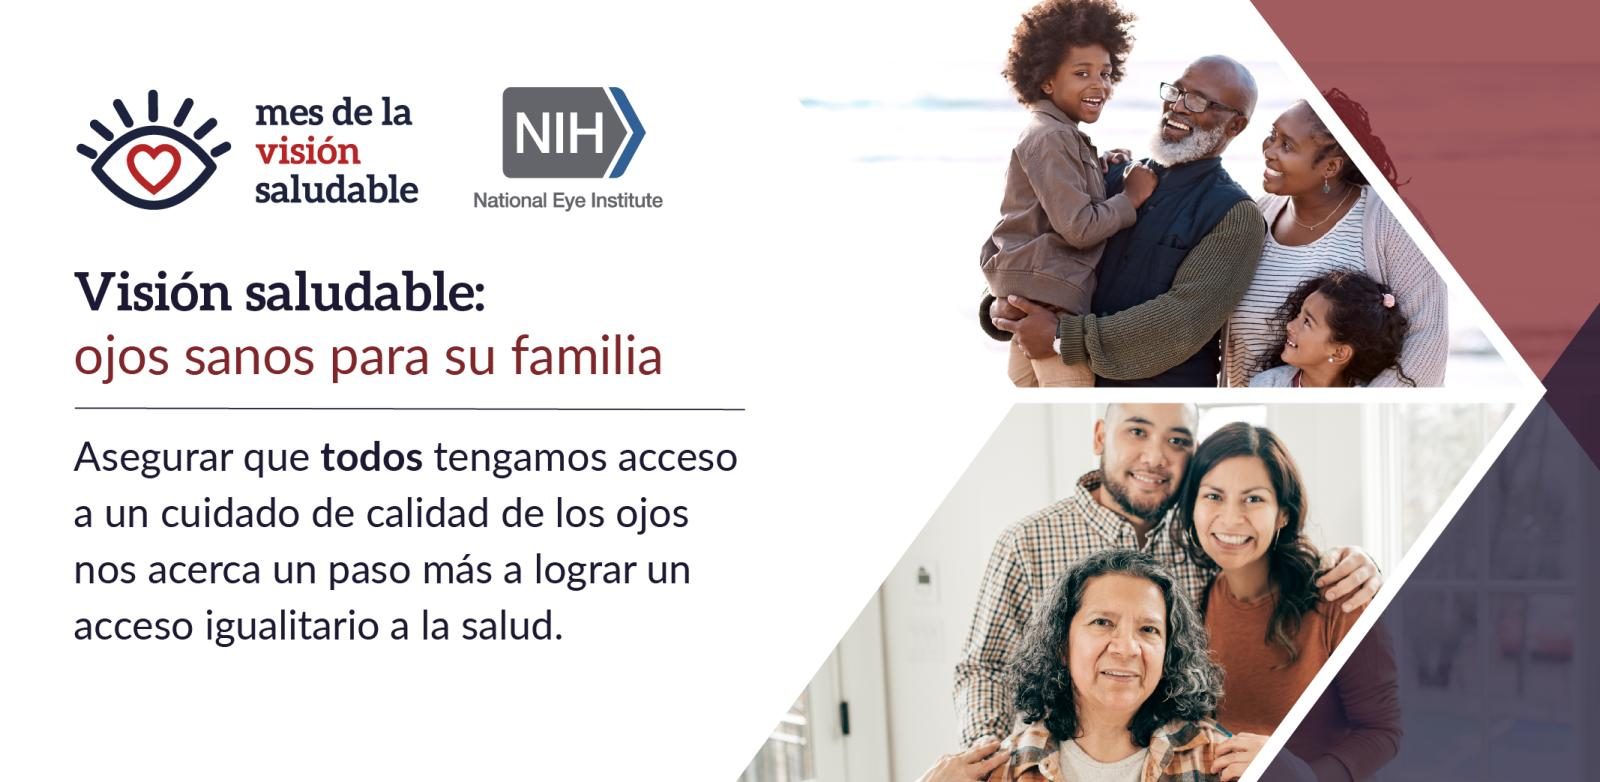 NEI healthy vision month message 1 spanish